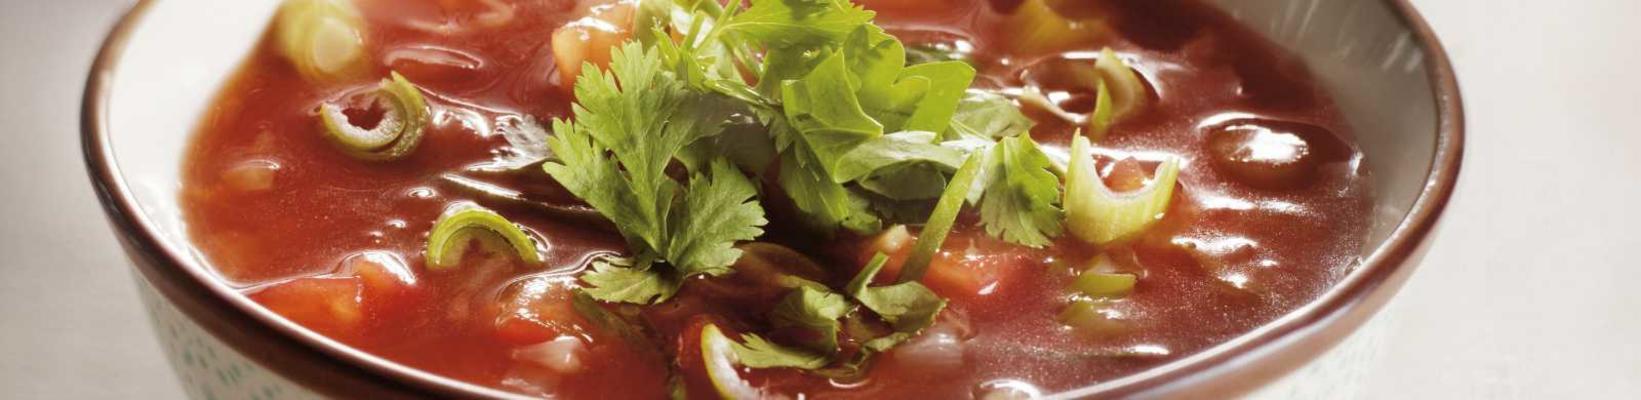 tomato broth with spring onion and coriander